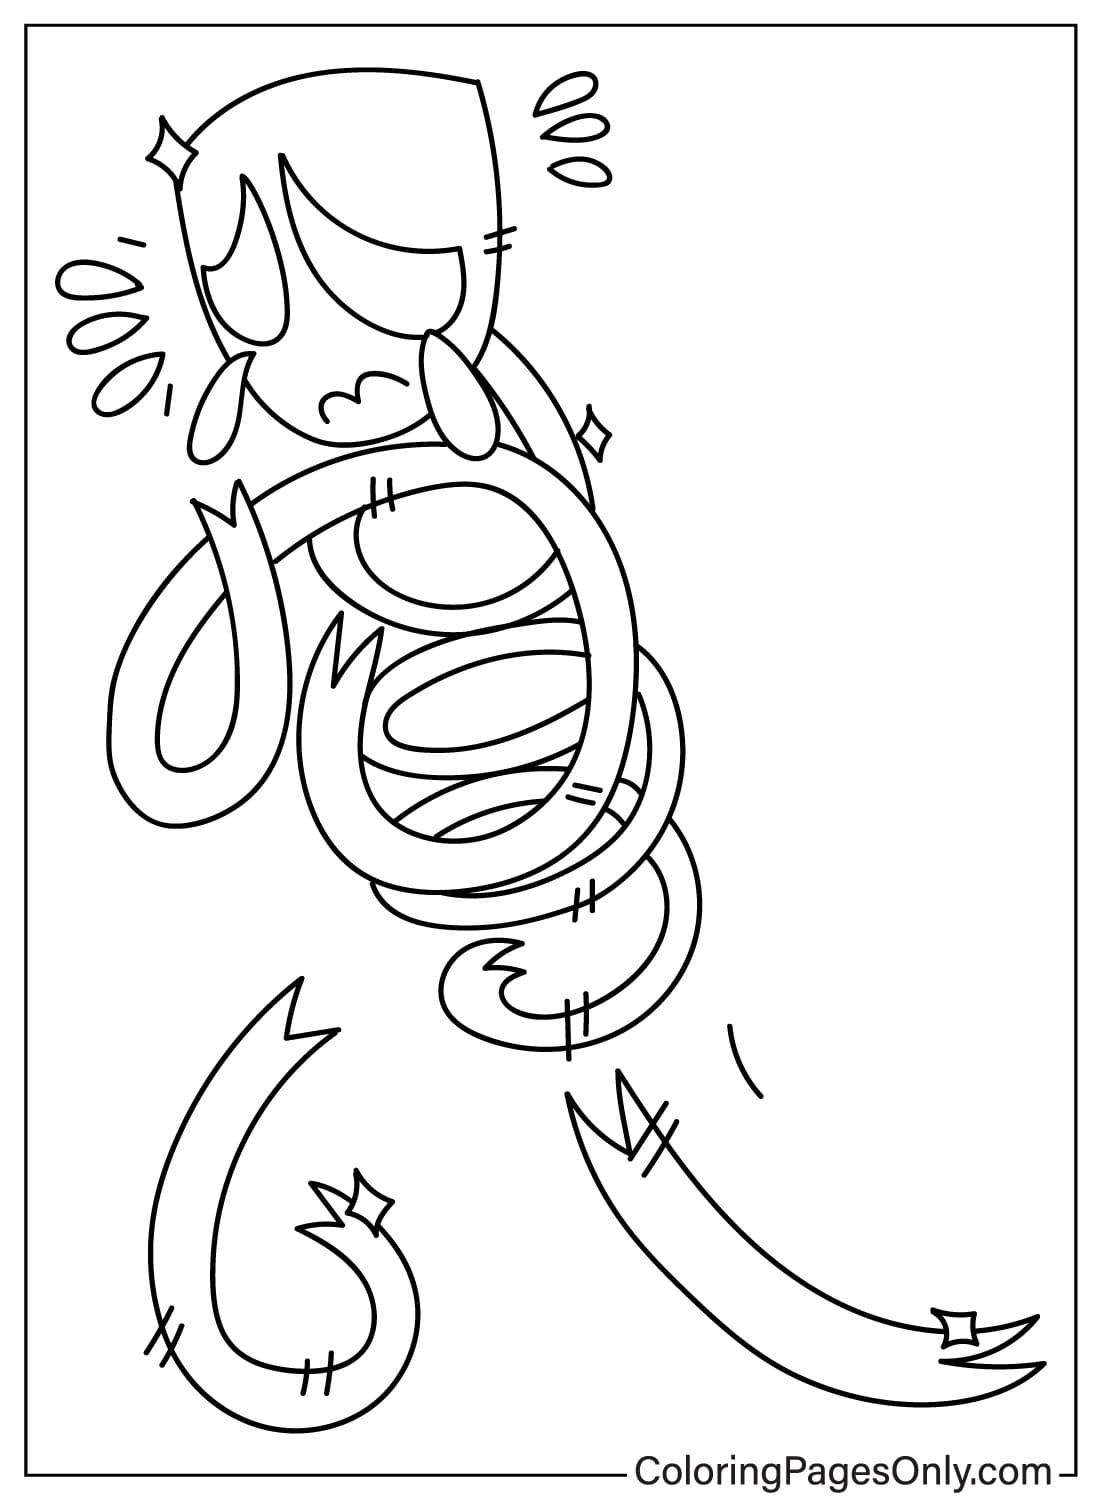 Gangle Coloring Page from Gangle